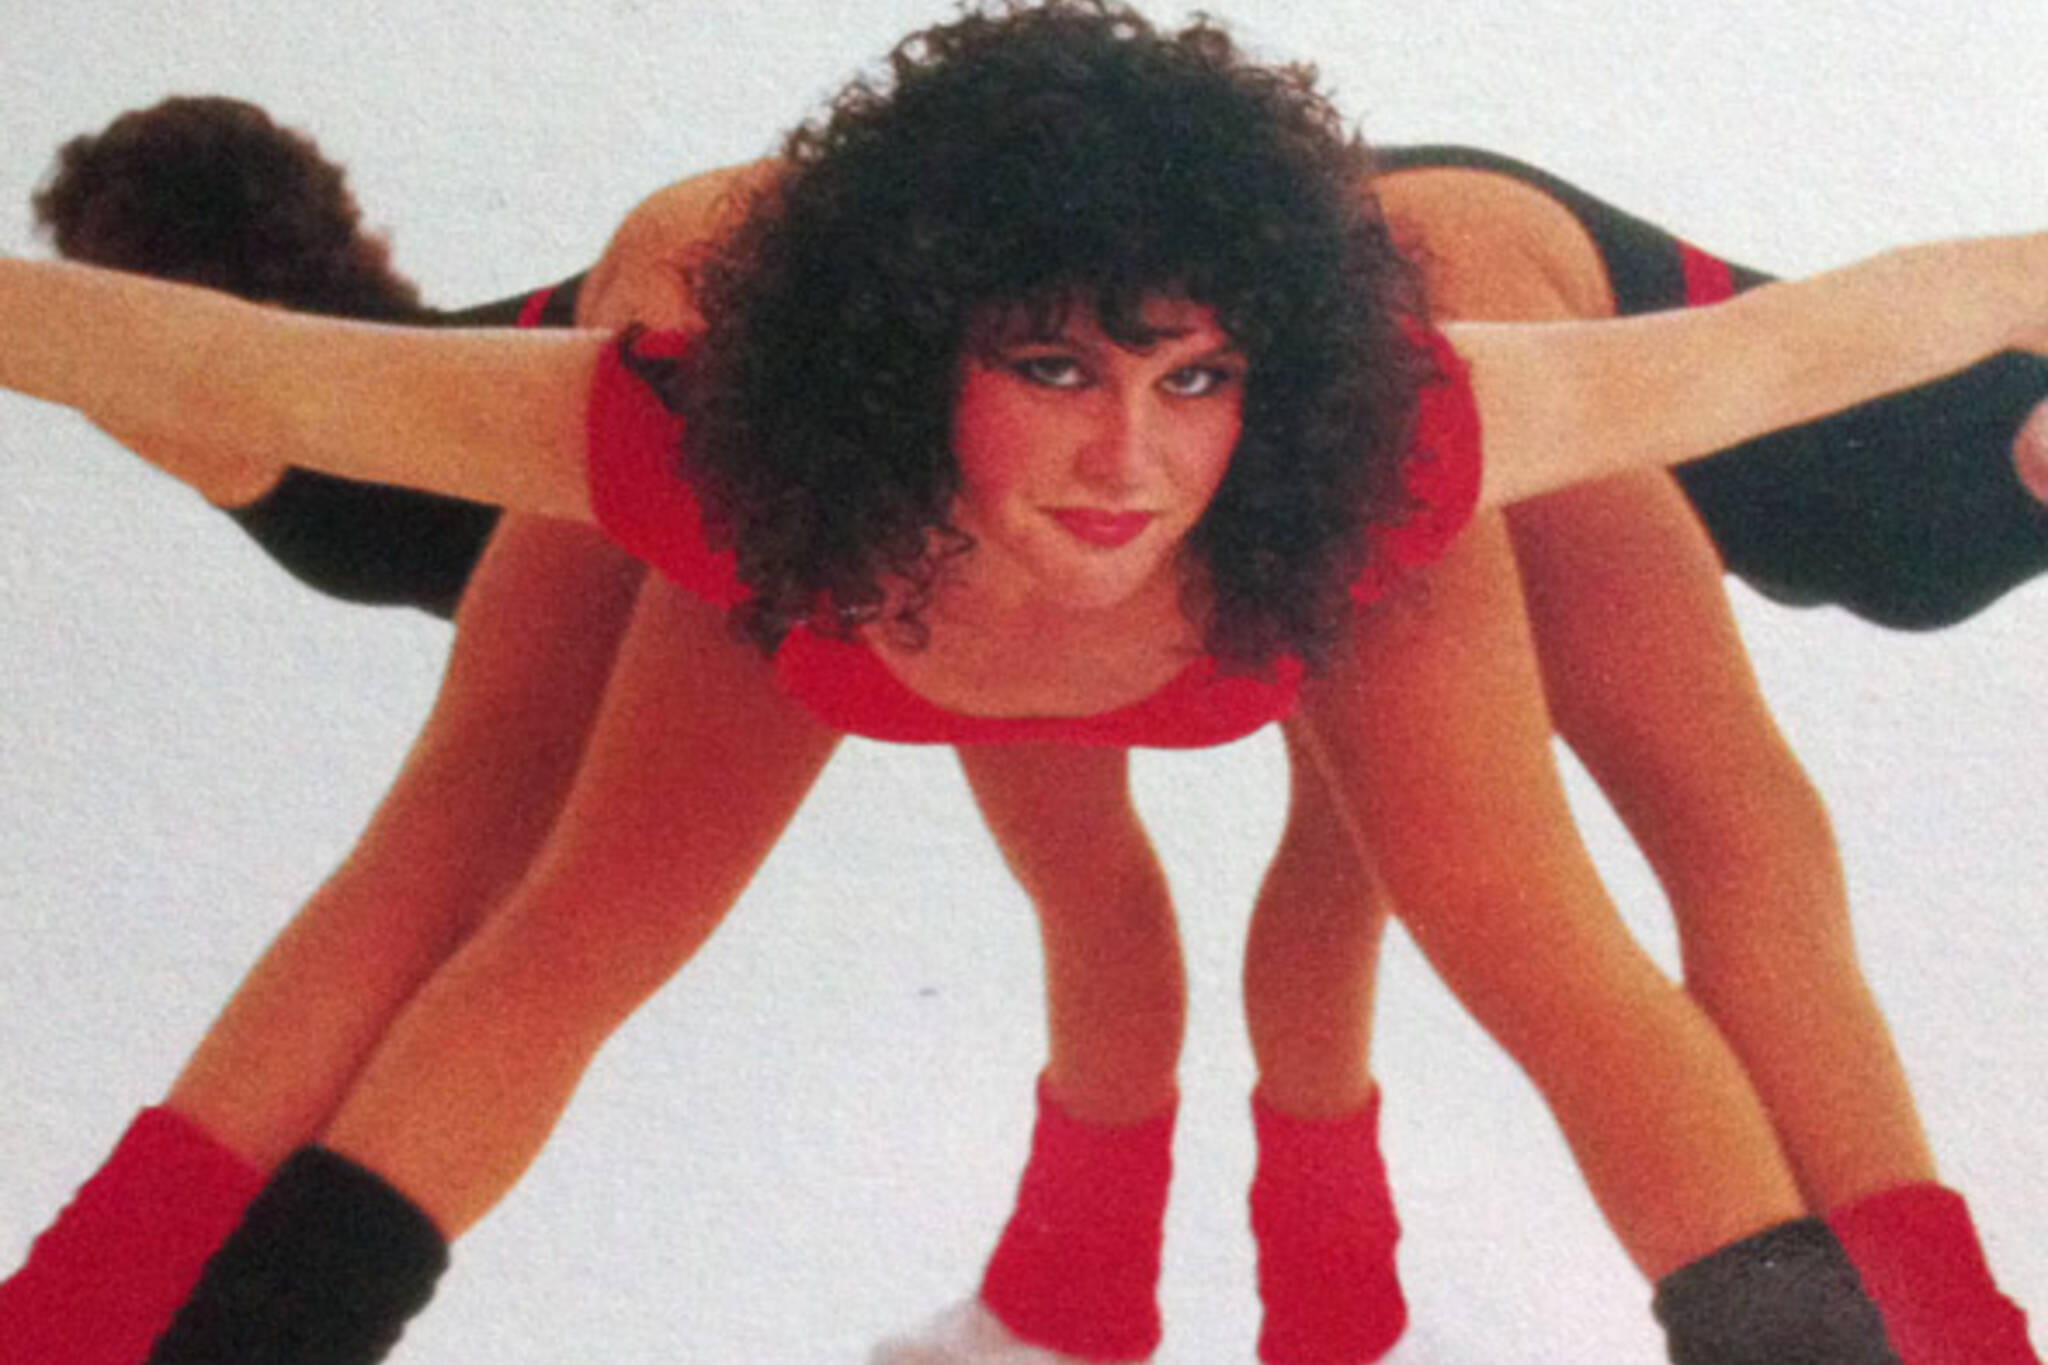 That Time When Toronto Tv Was Fit For Aerobics